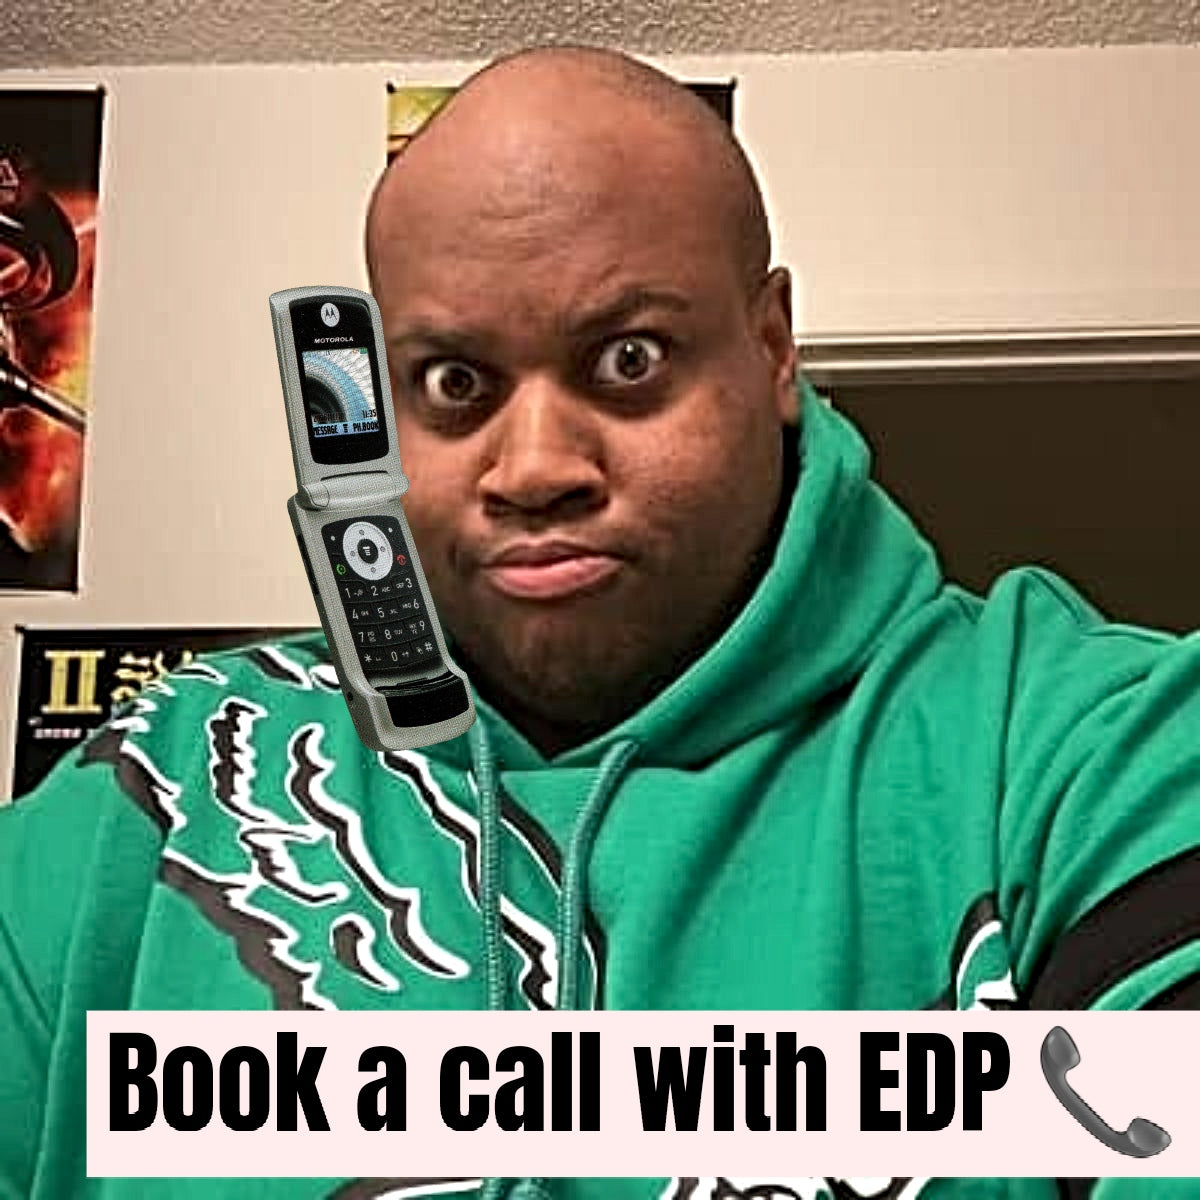 Book a call with edp445